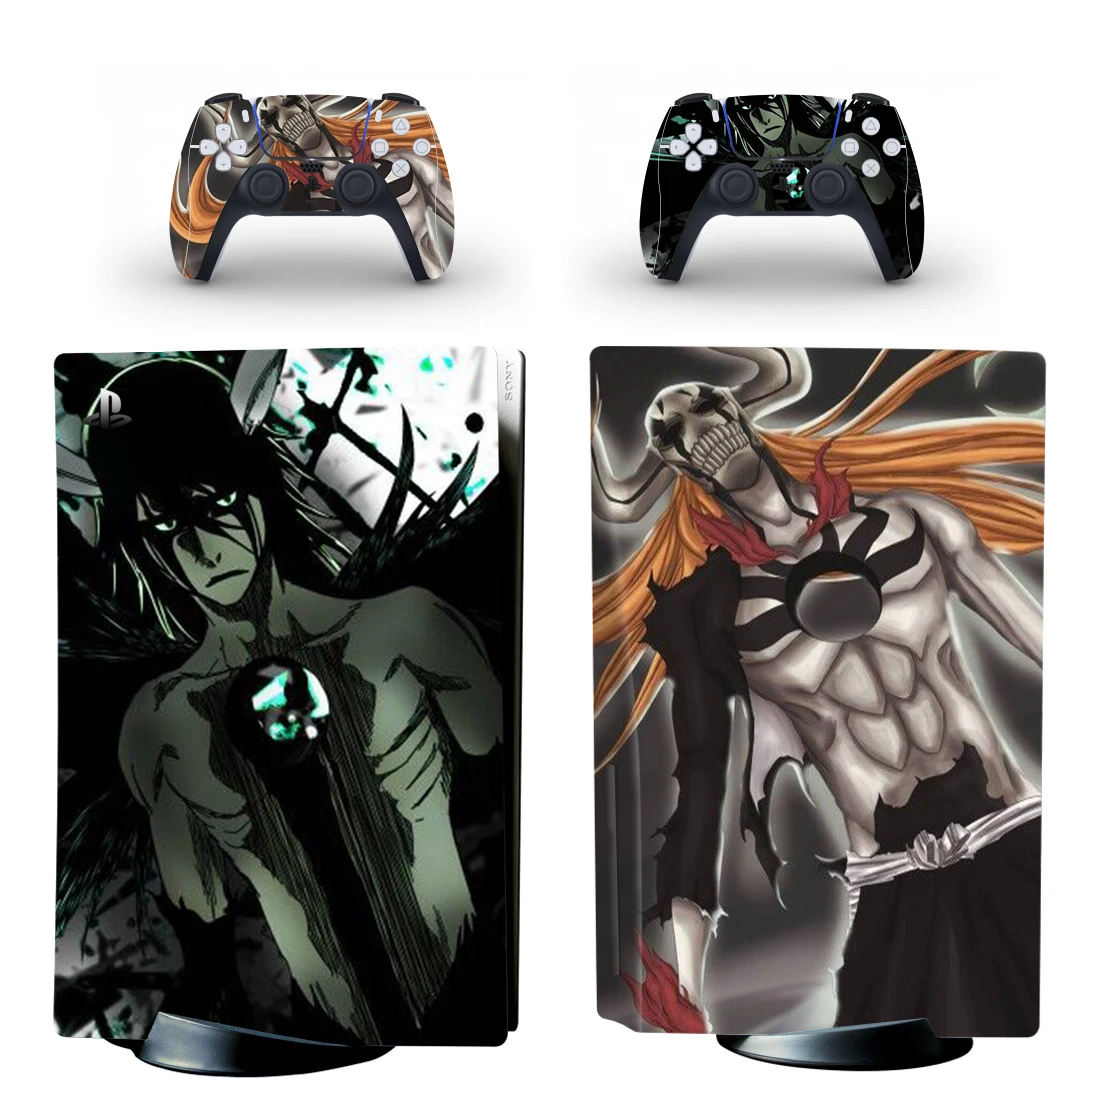 

BLEACH Kurosaki Ichigo PS5 Disc Skin Sticker Cover for Playstation 5 Console & 2 Controllers Decal Vinyl Protective Disk Skins